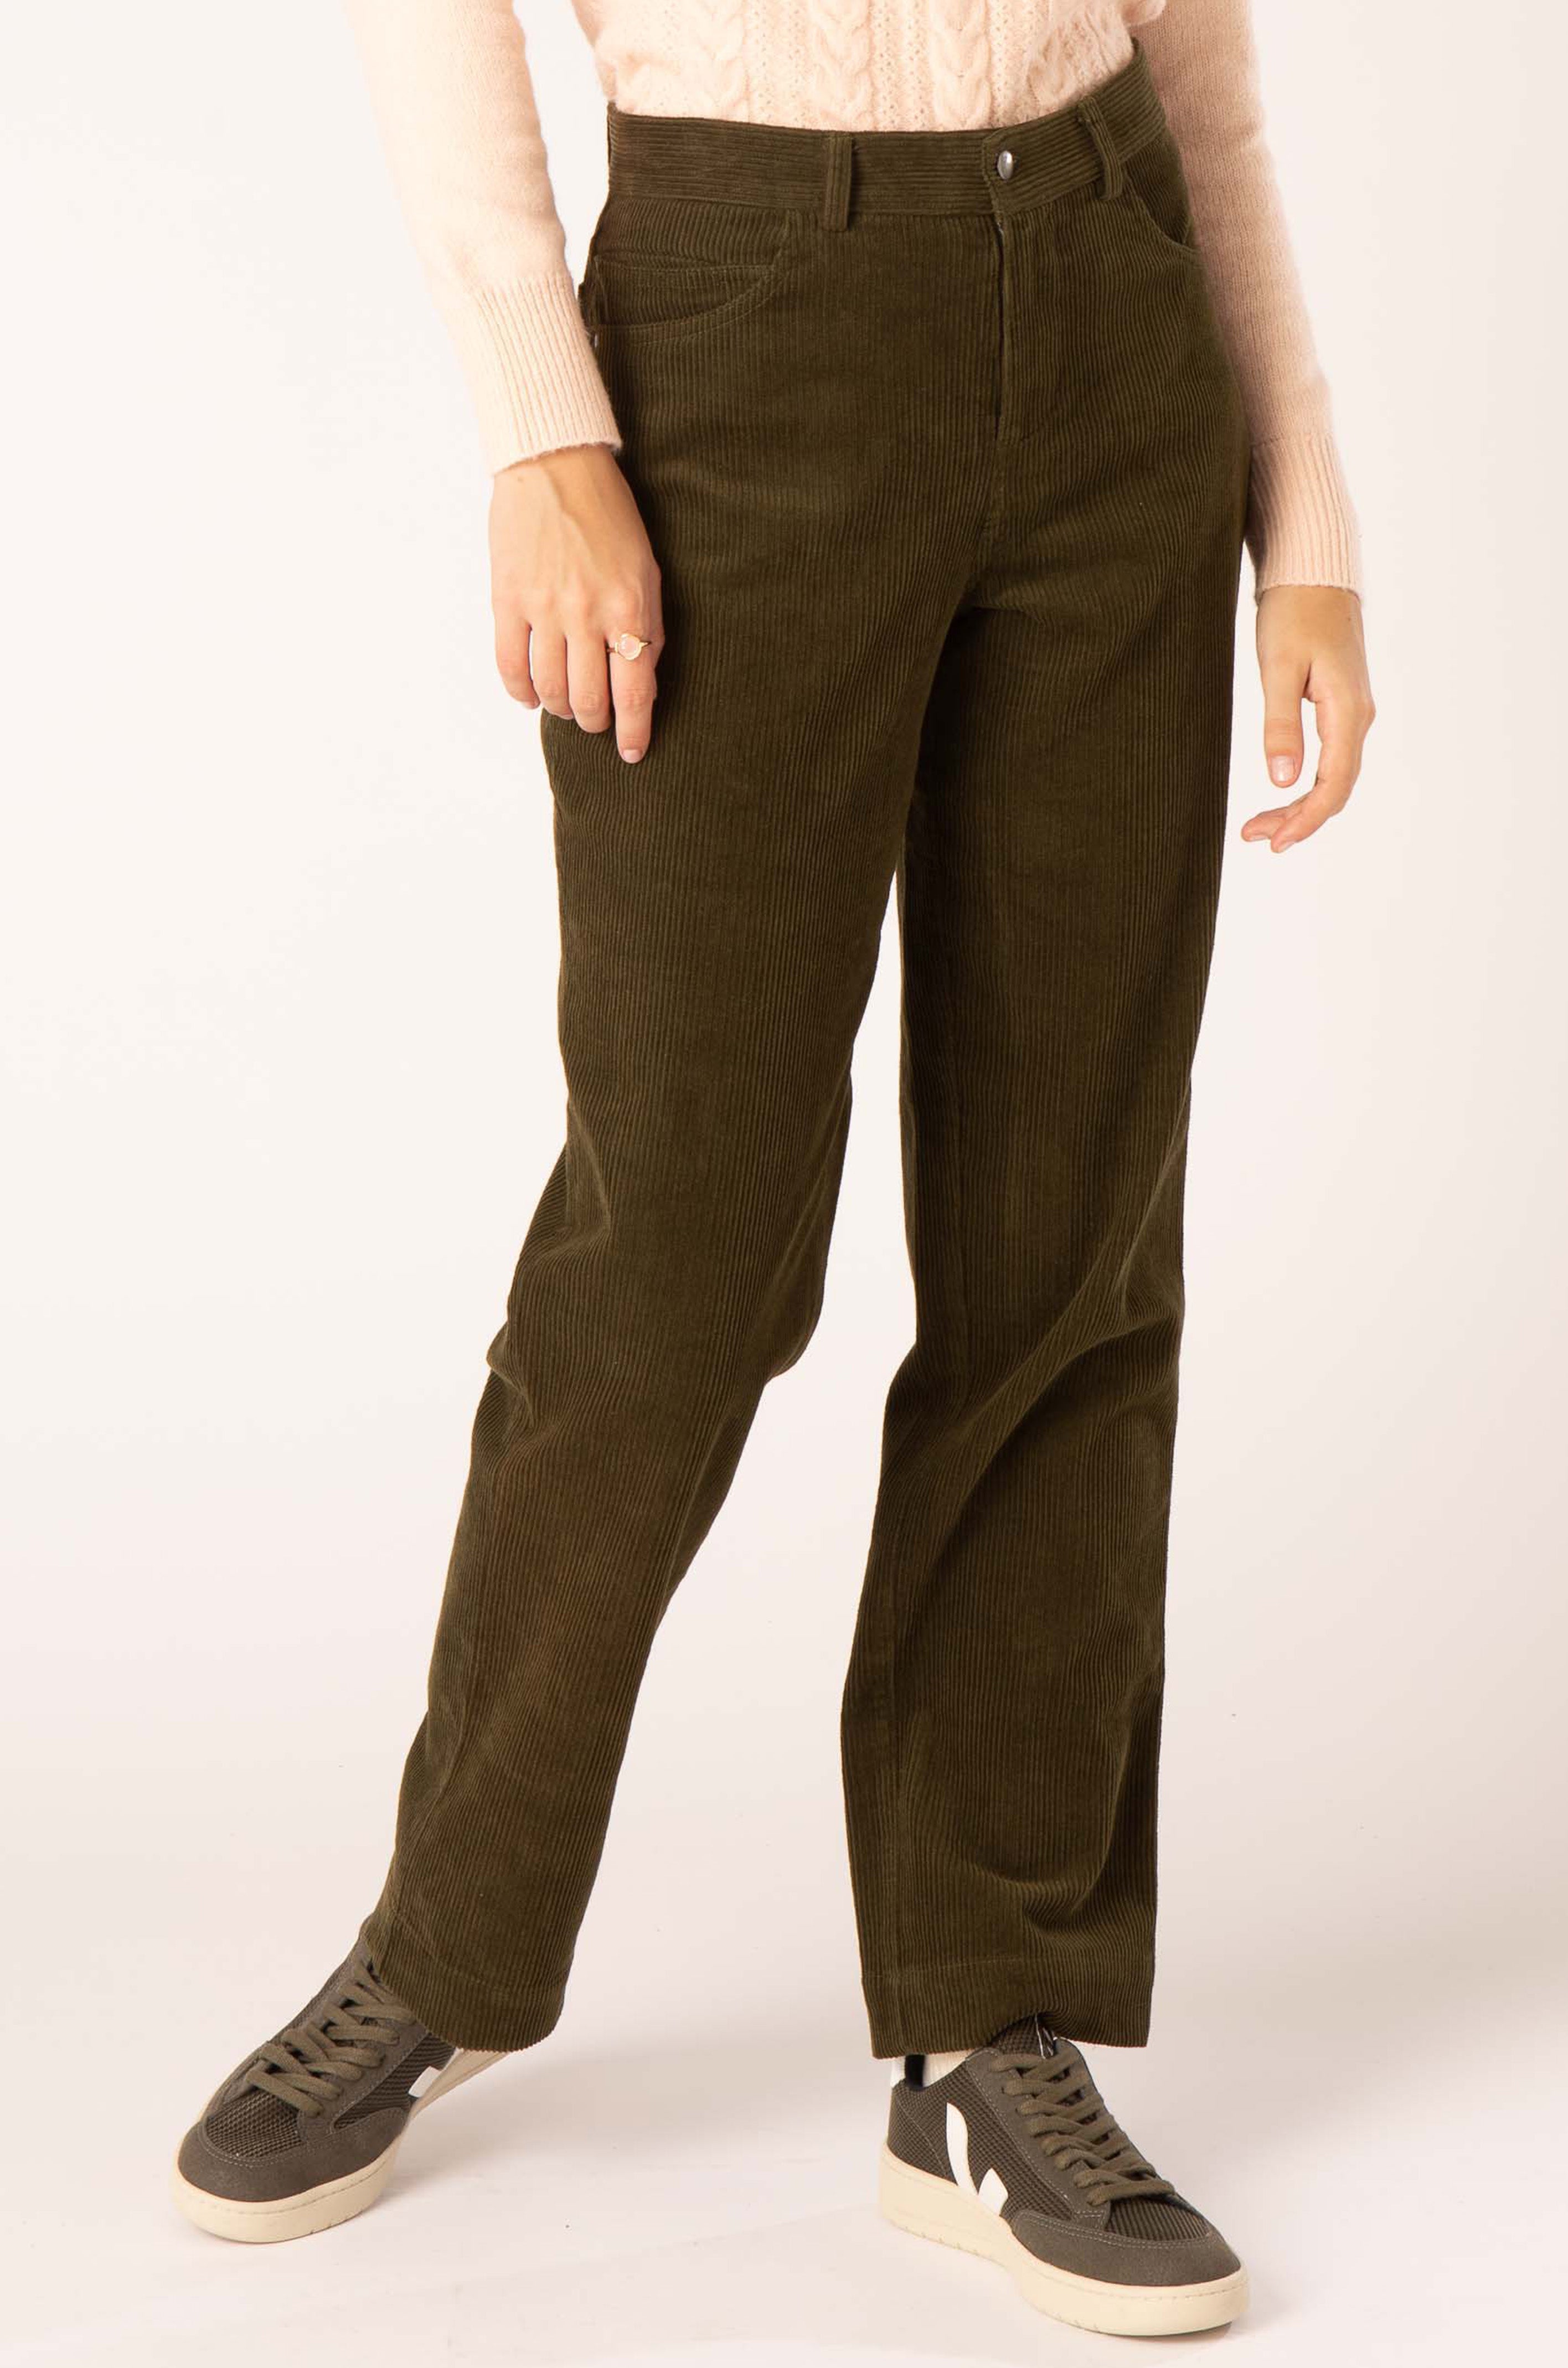 Cord Trouser in Military Olive, Military Olive / 12